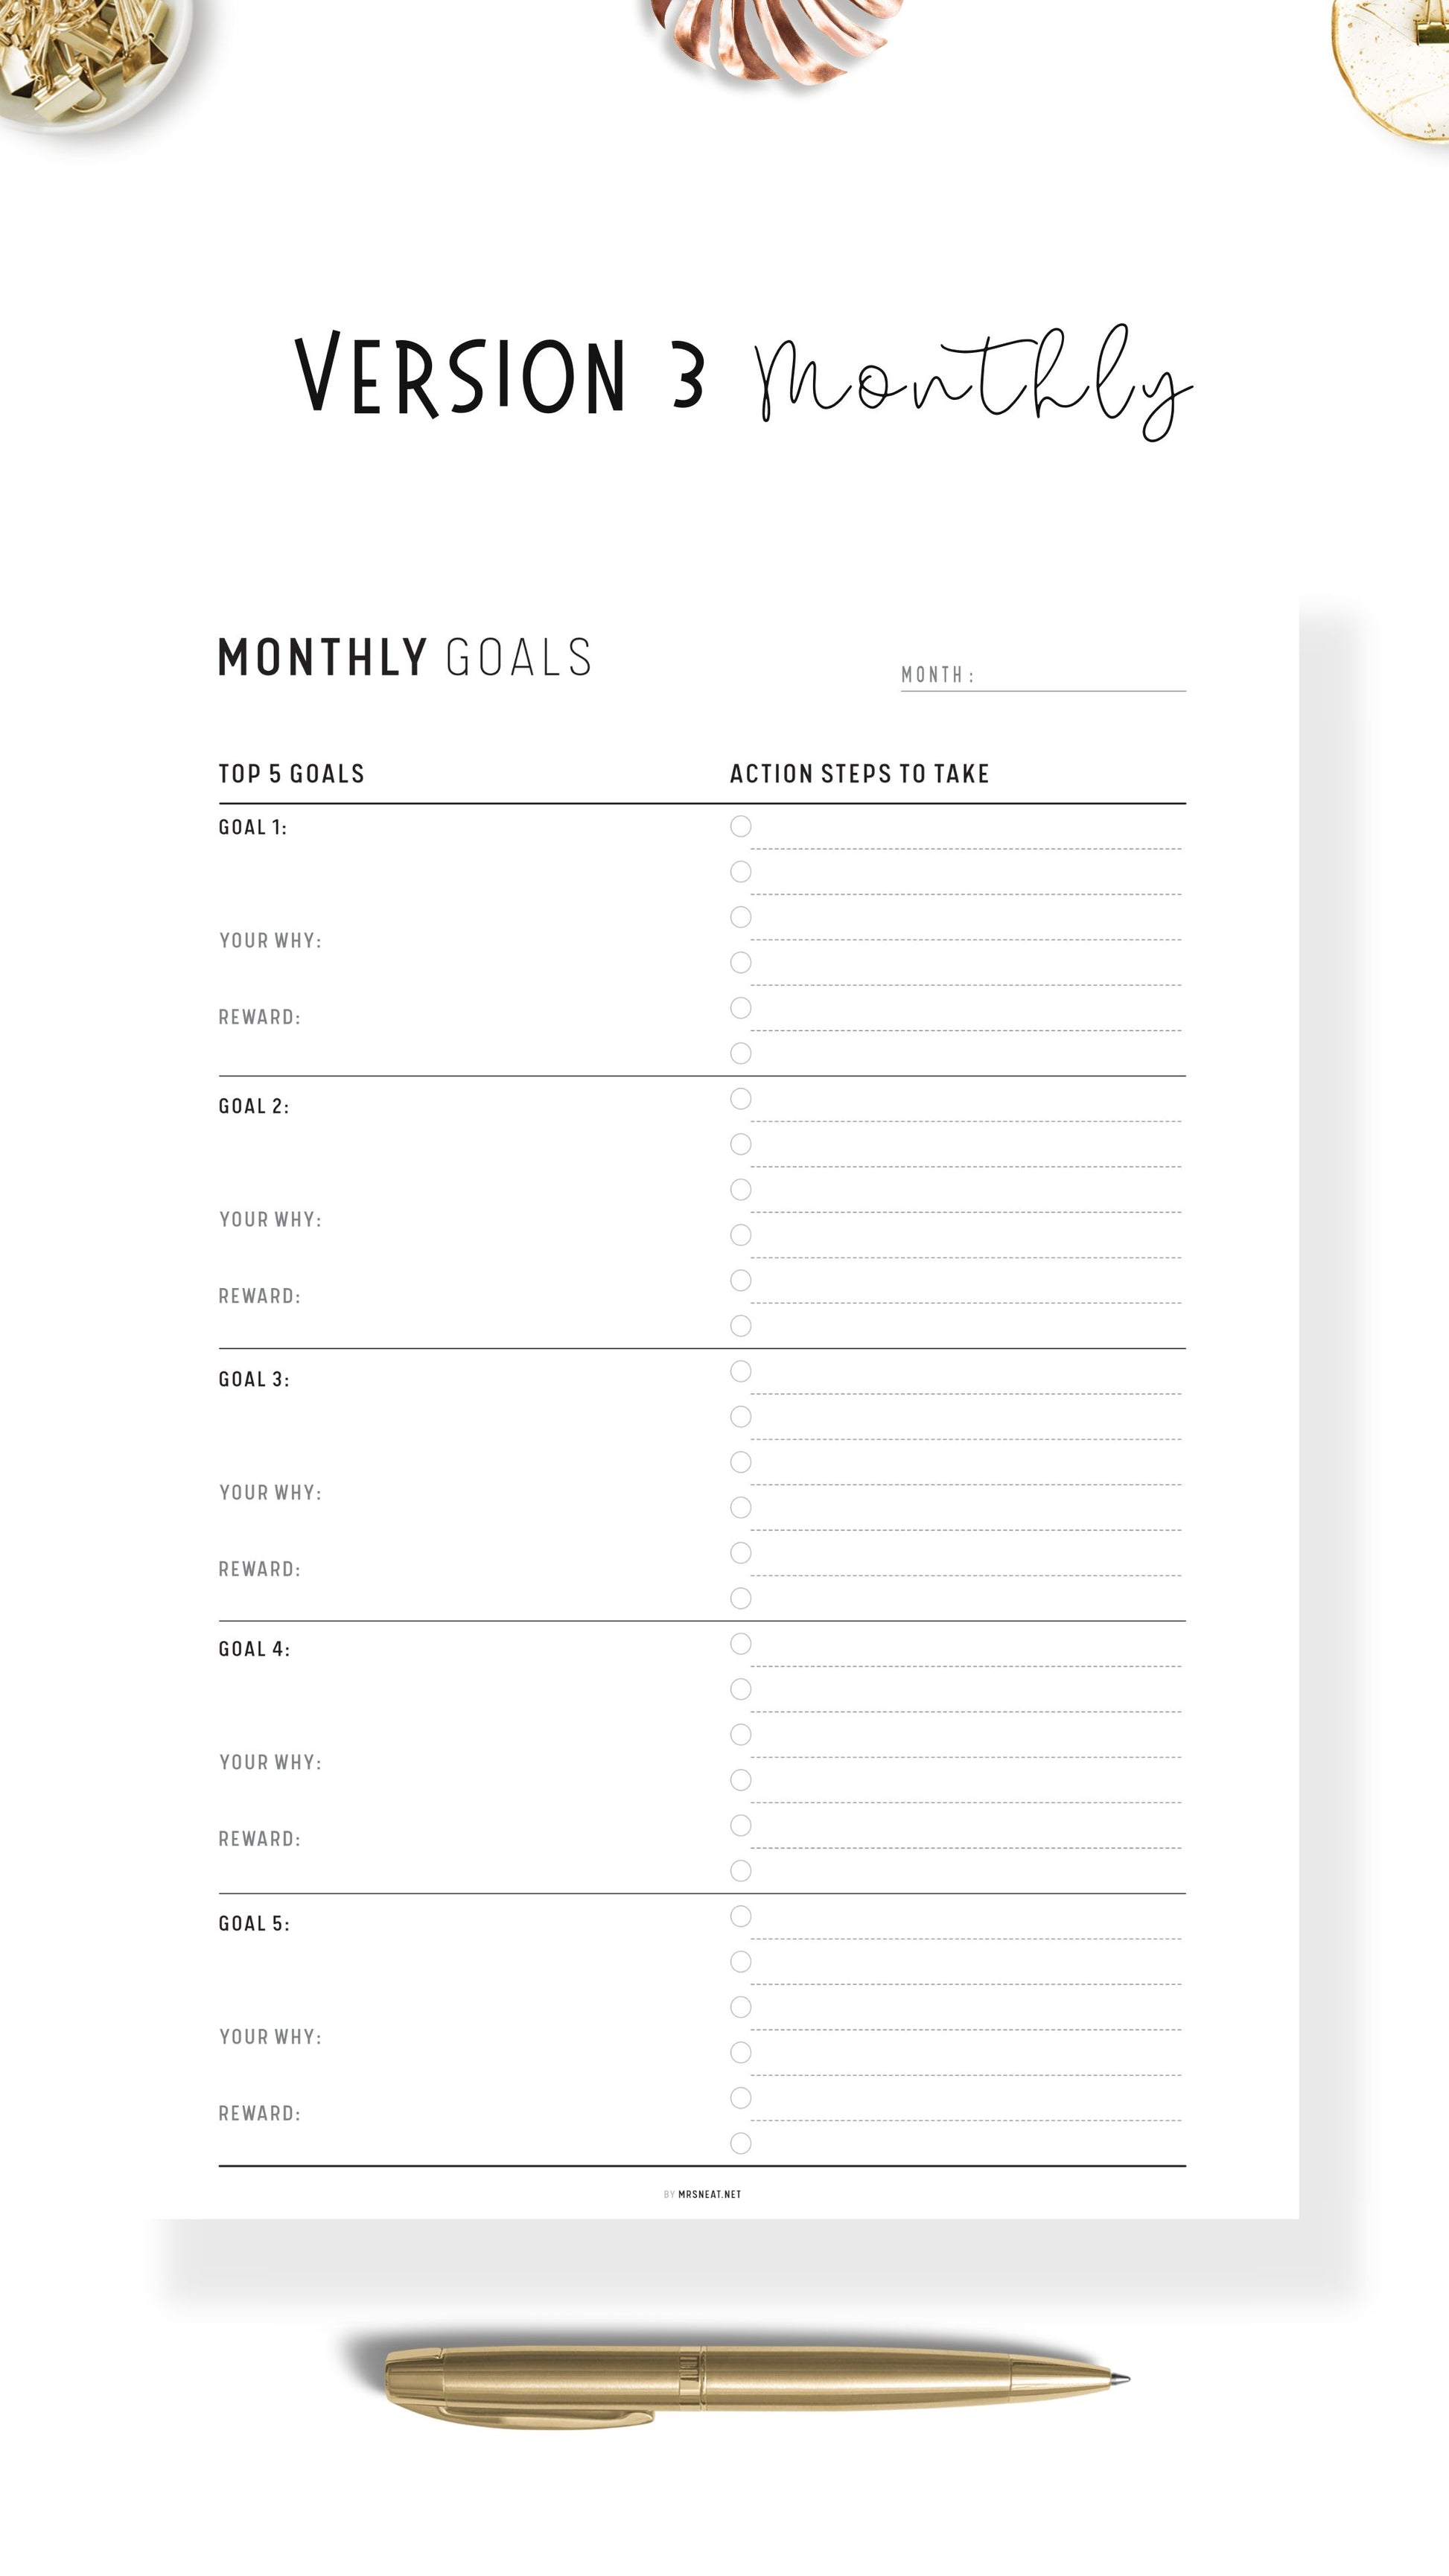 Top 5 Yearly, Quarterly, Monthly, Weekly Goals Planner Printable, Goal Setting, Goal Planning, Productivity Planner, A4/a5/letter/half, Digital Planner, Minimalist Goal Planner